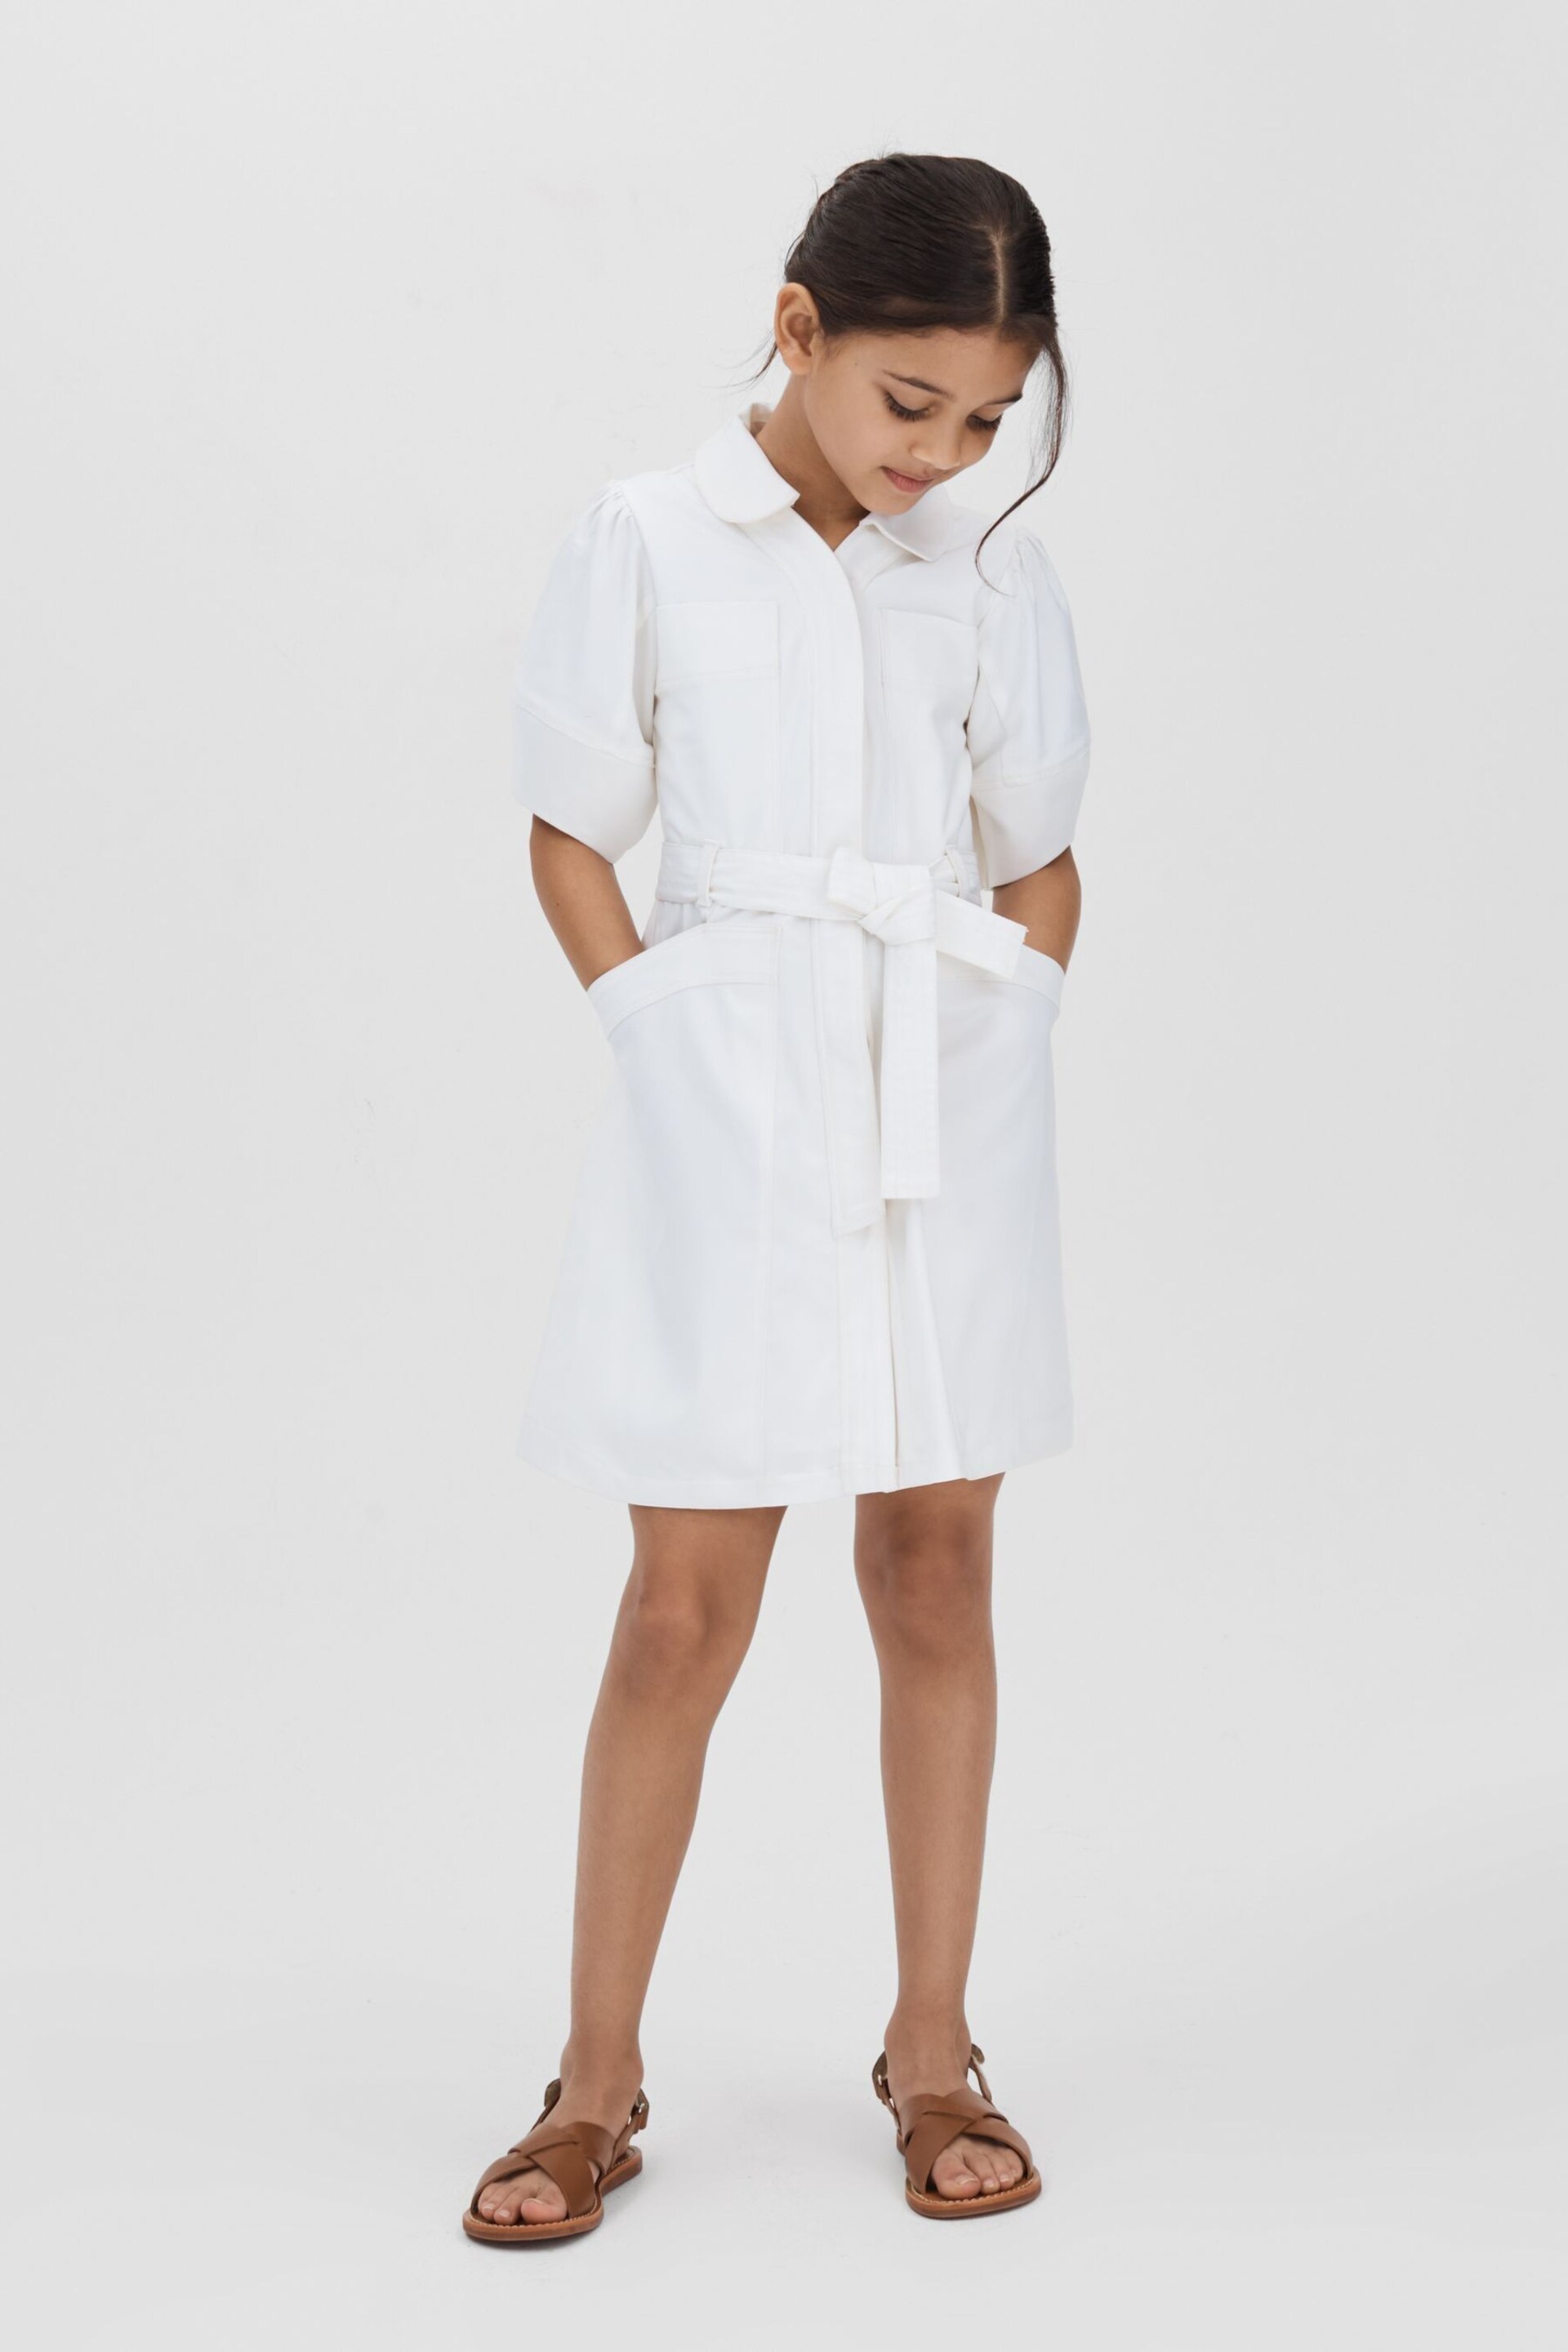 Reiss Ivory Ginny Senior Belted Puff Sleeve Dress - Image 3 of 4